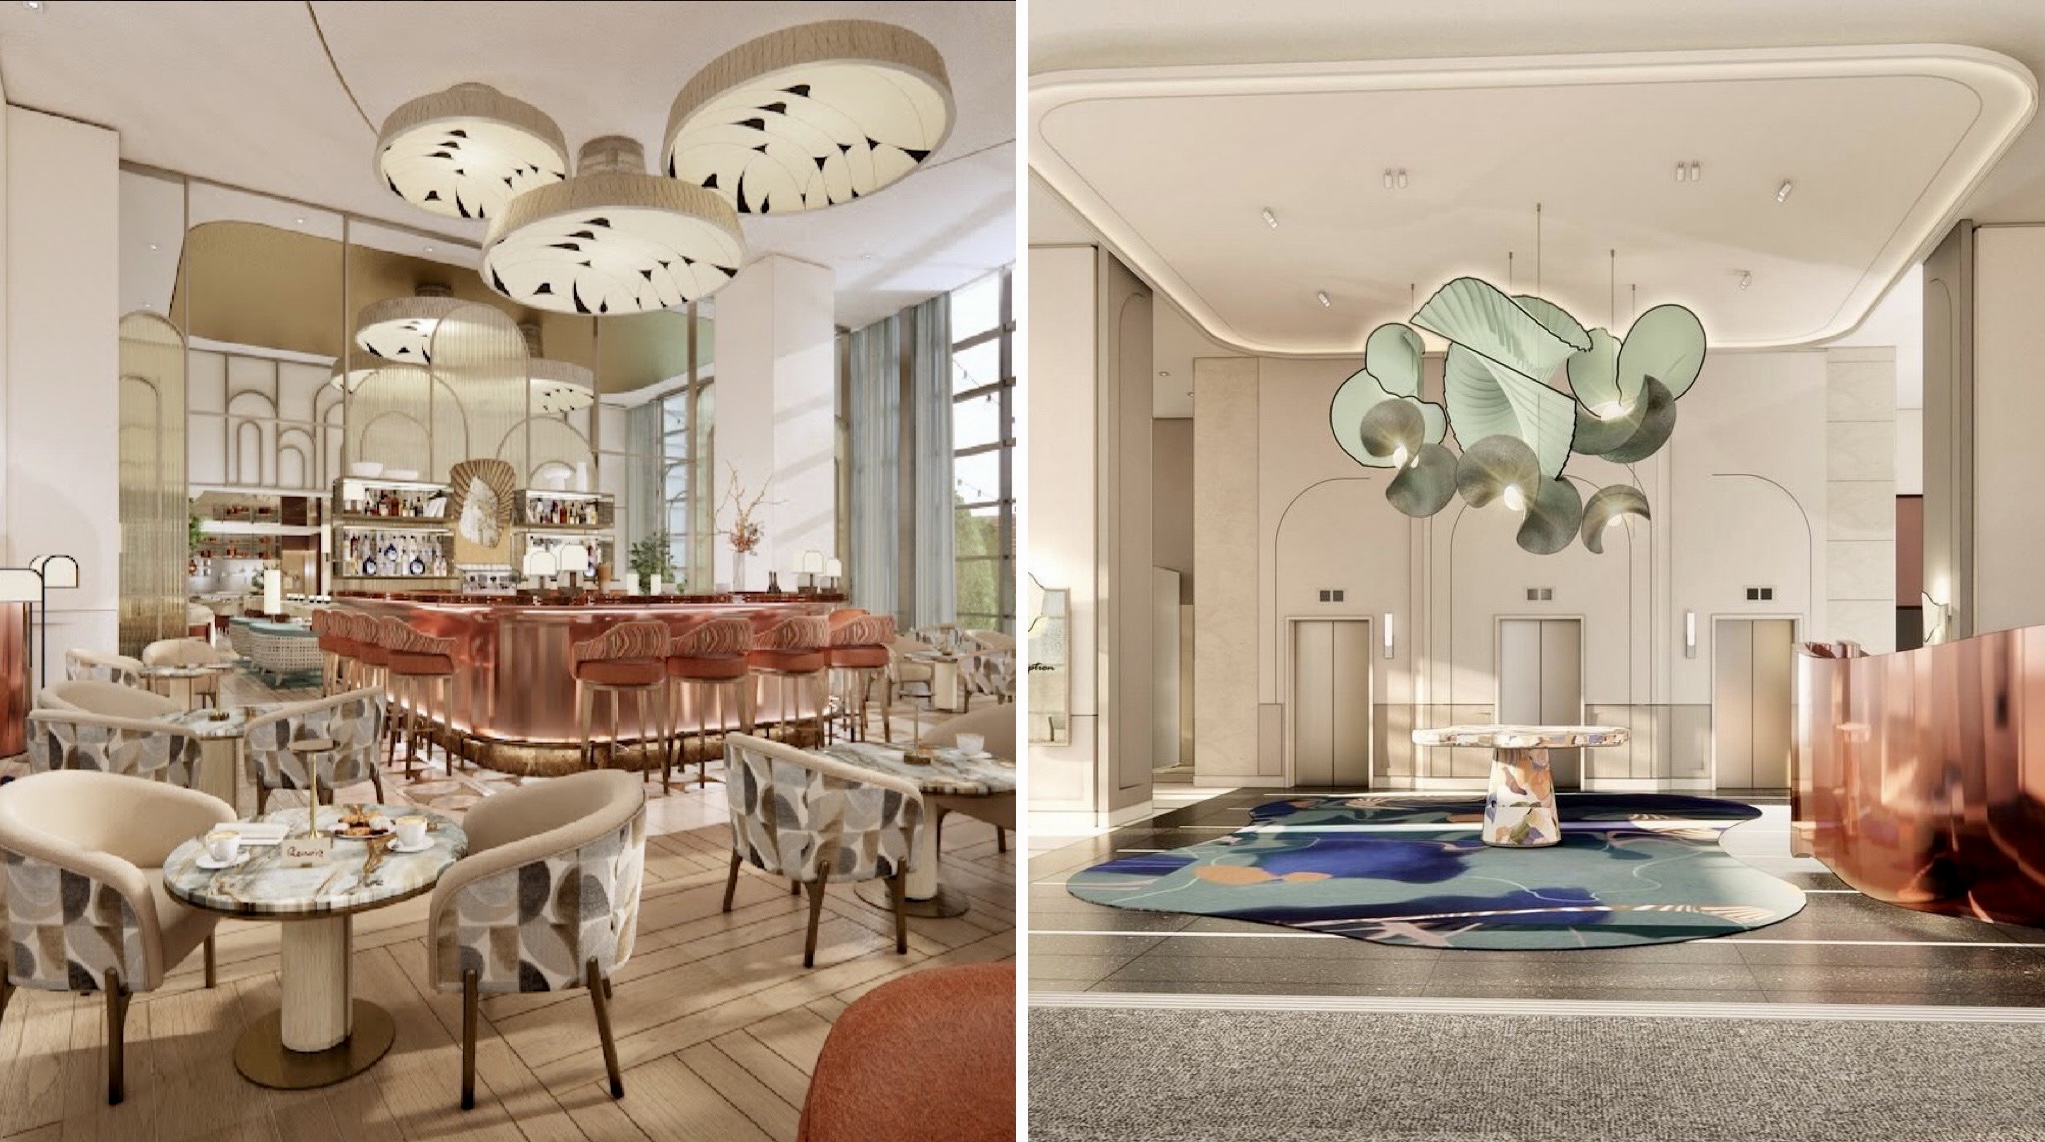 The Sofitel hotel in Montreal is undergoing a stunning transformation